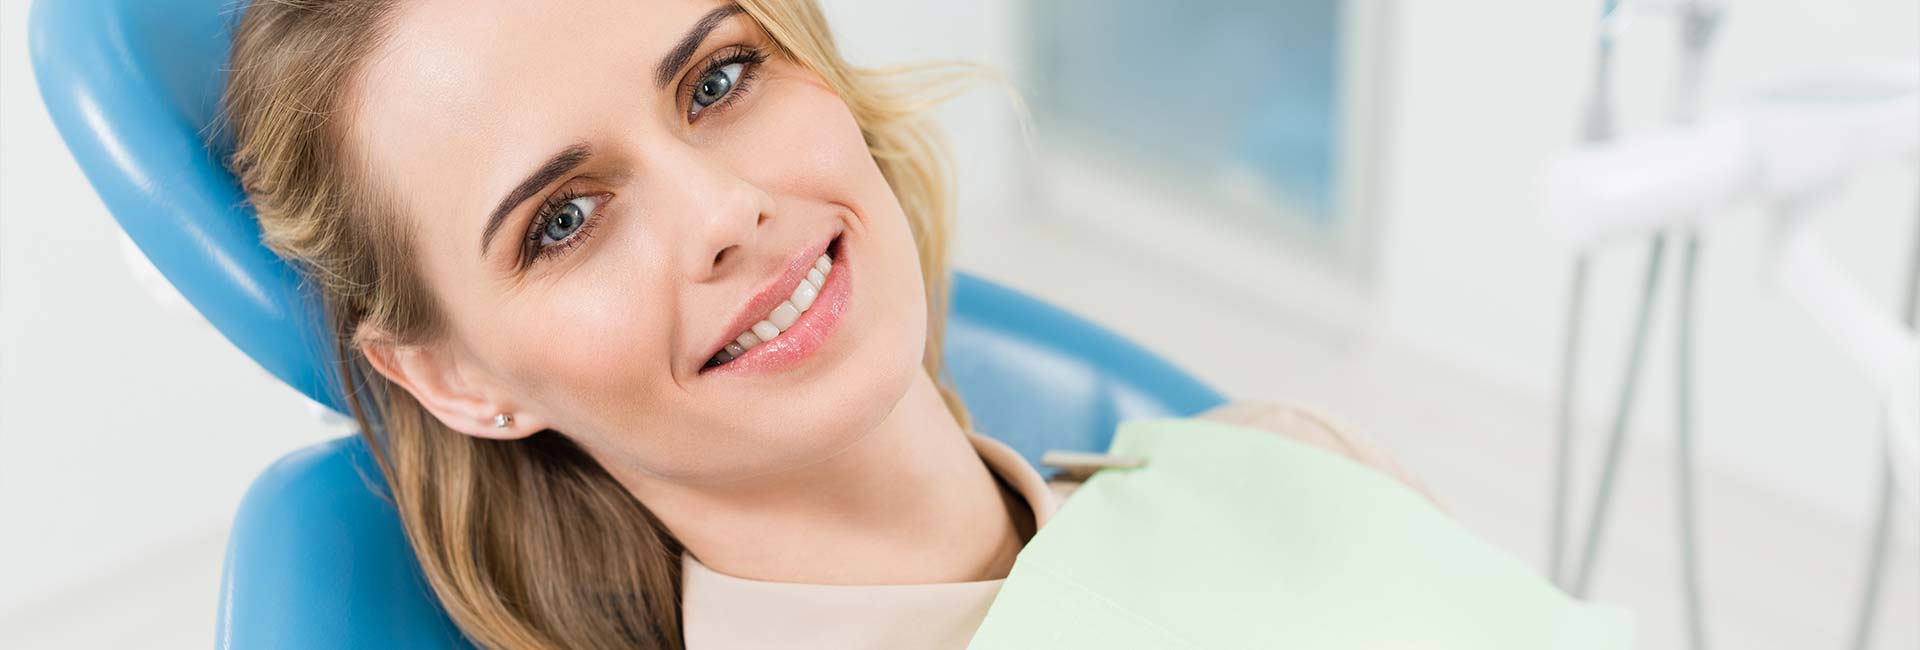 Enhance Your Smile With Our Oklahoma City Cosmetic Dentist